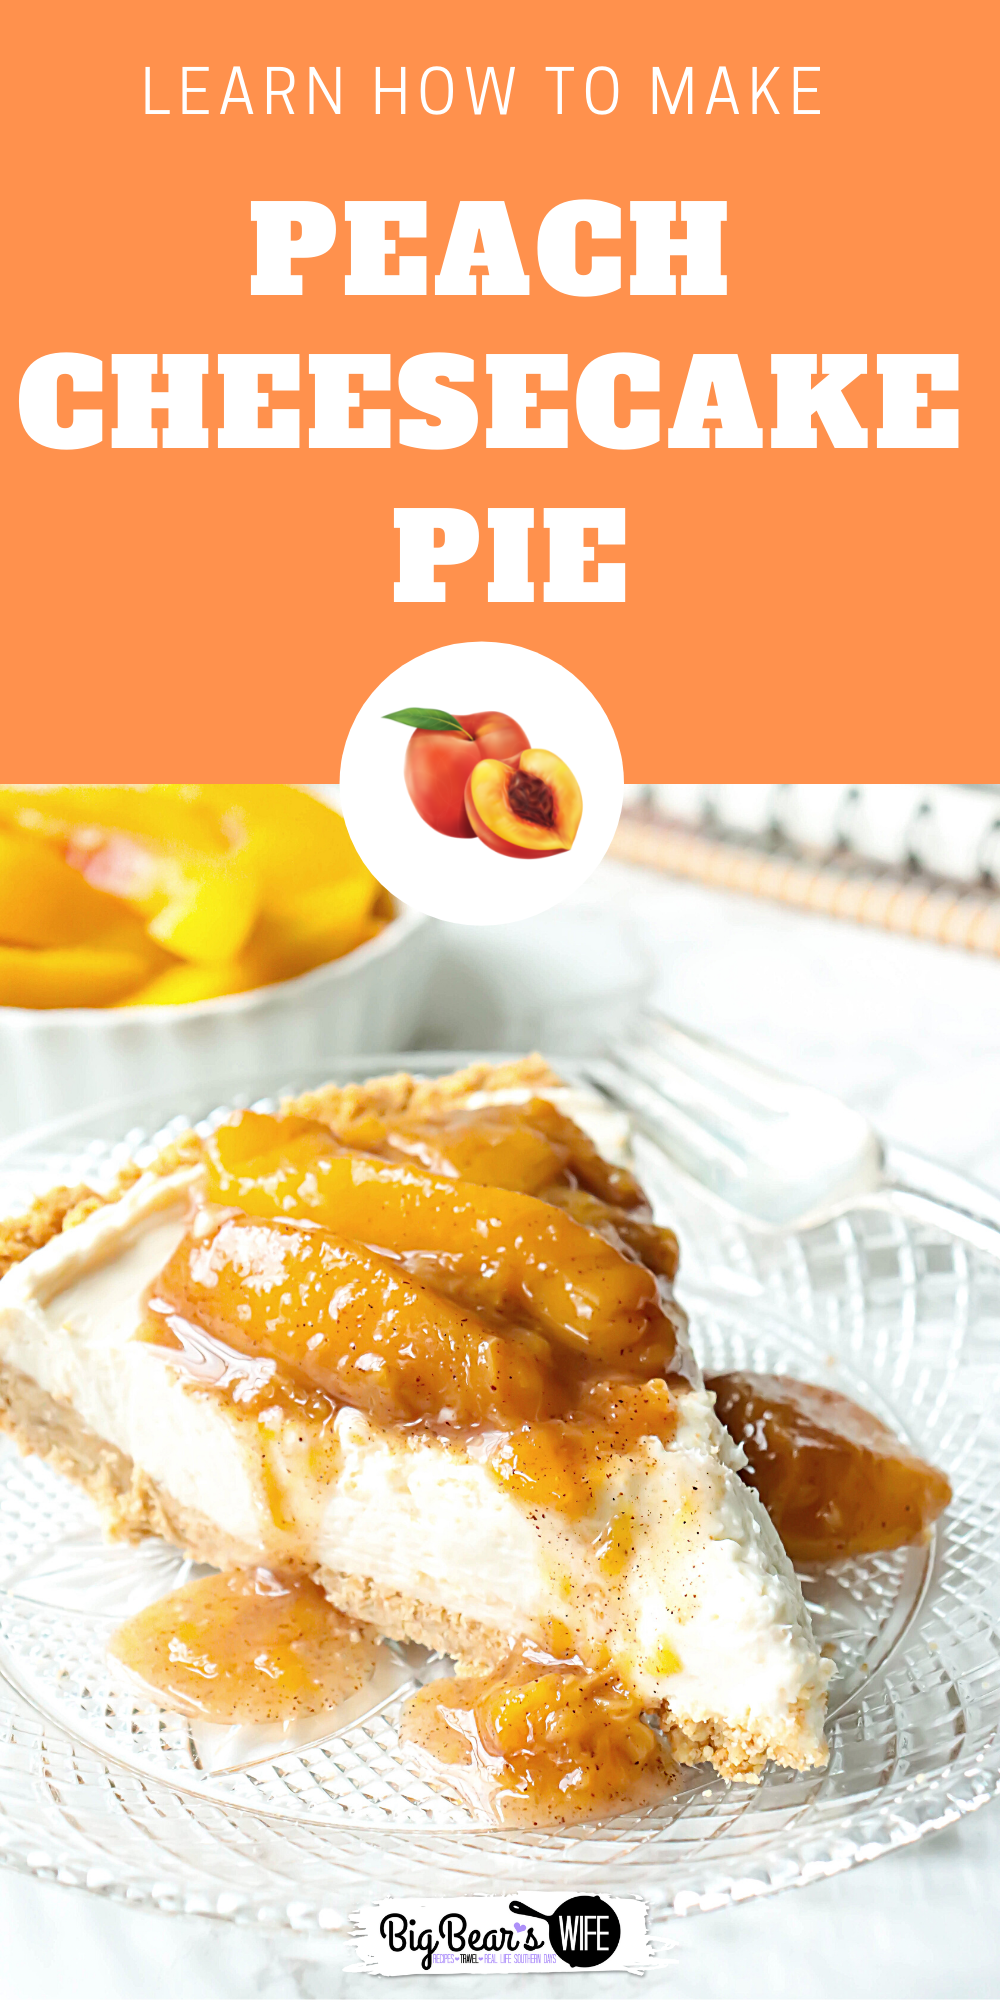 This chilled and creamy Peach Cheesecake Pie has a homemade graham cracker crust and is topped with a delicious peach sauce! via @bigbearswife